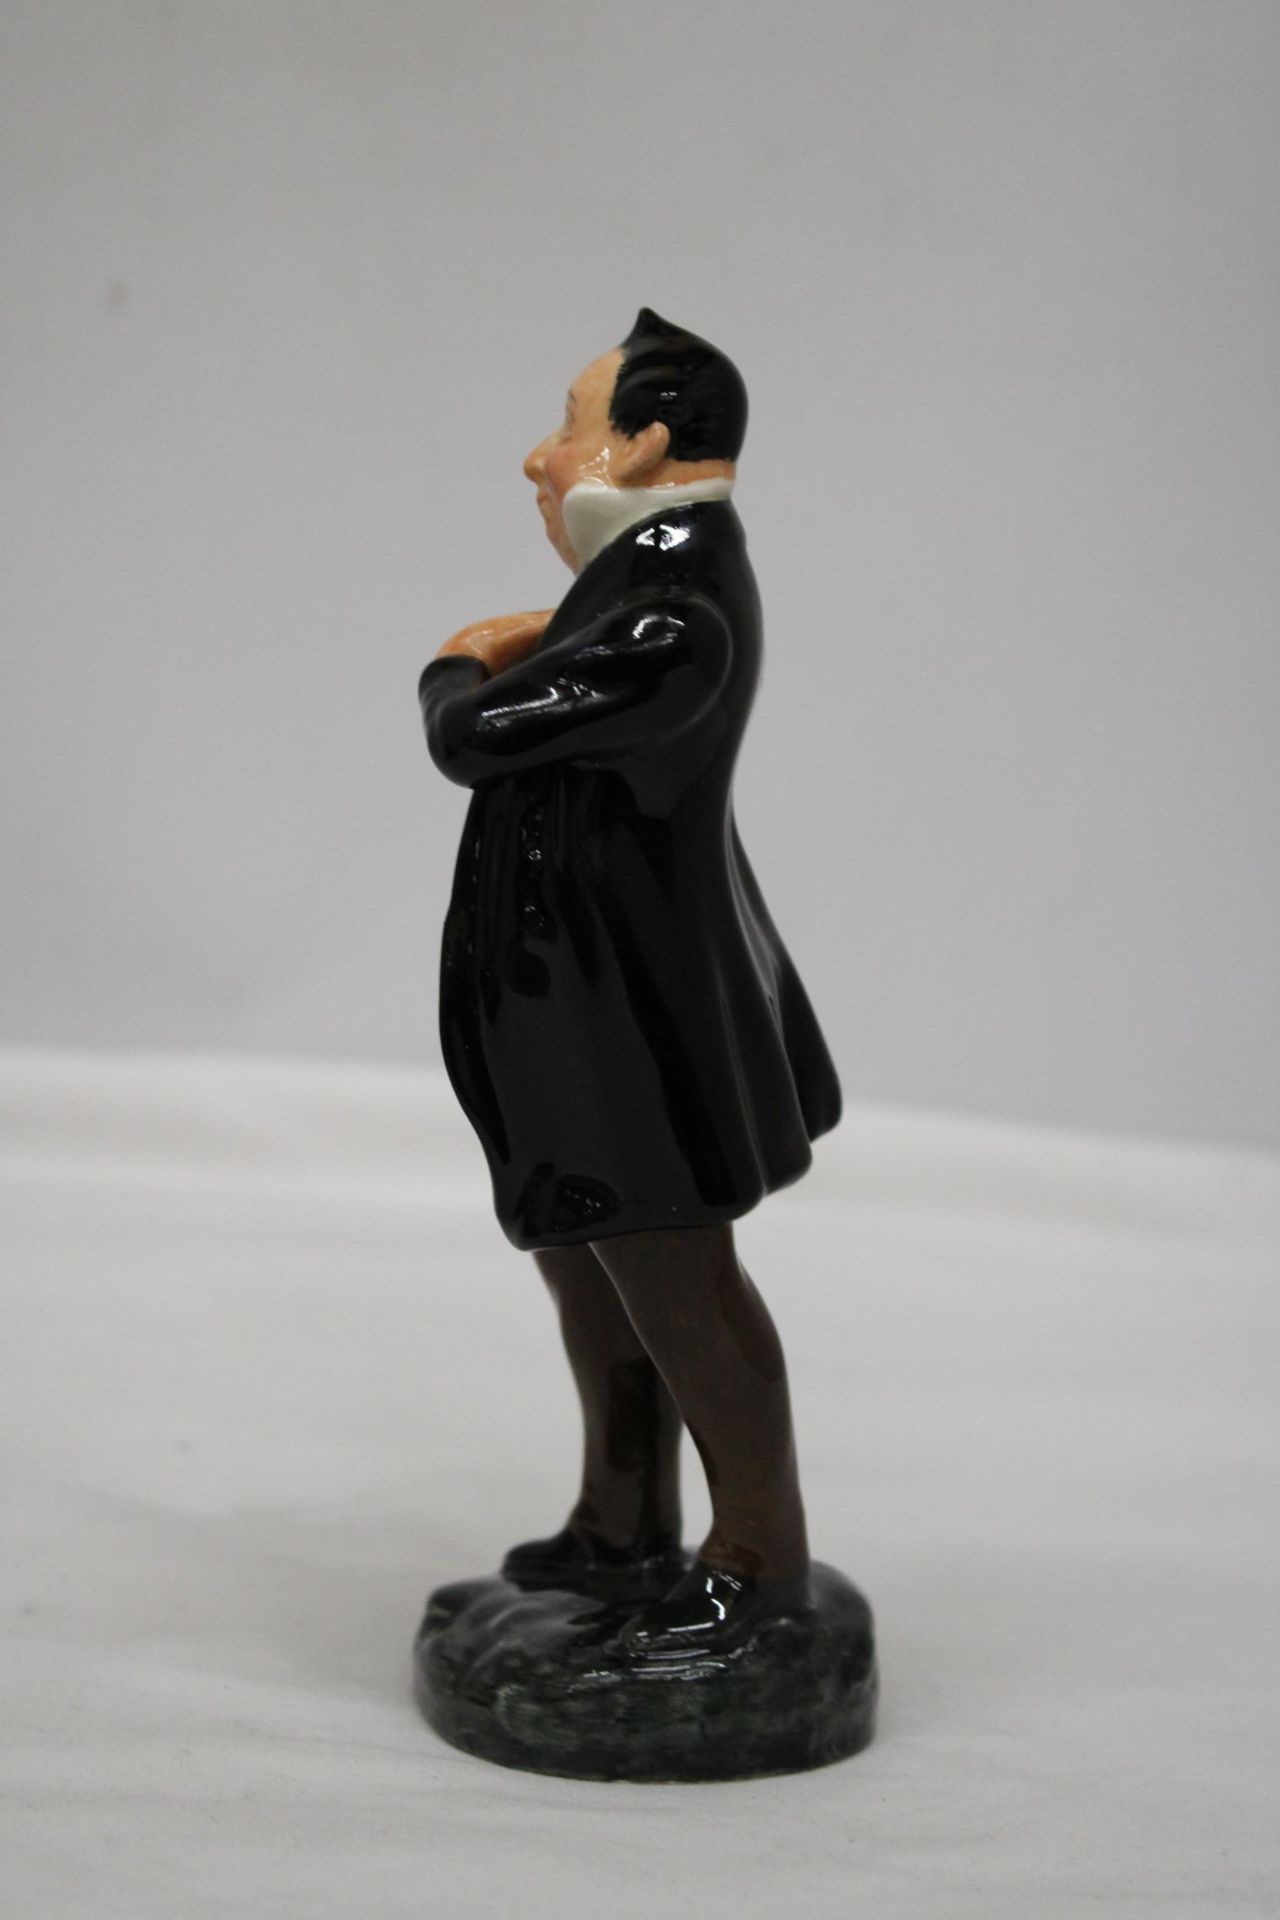 A ROYAL DOULTON 'PECKSNIFF' FIGURINE (HN 2098) - Image 5 of 6